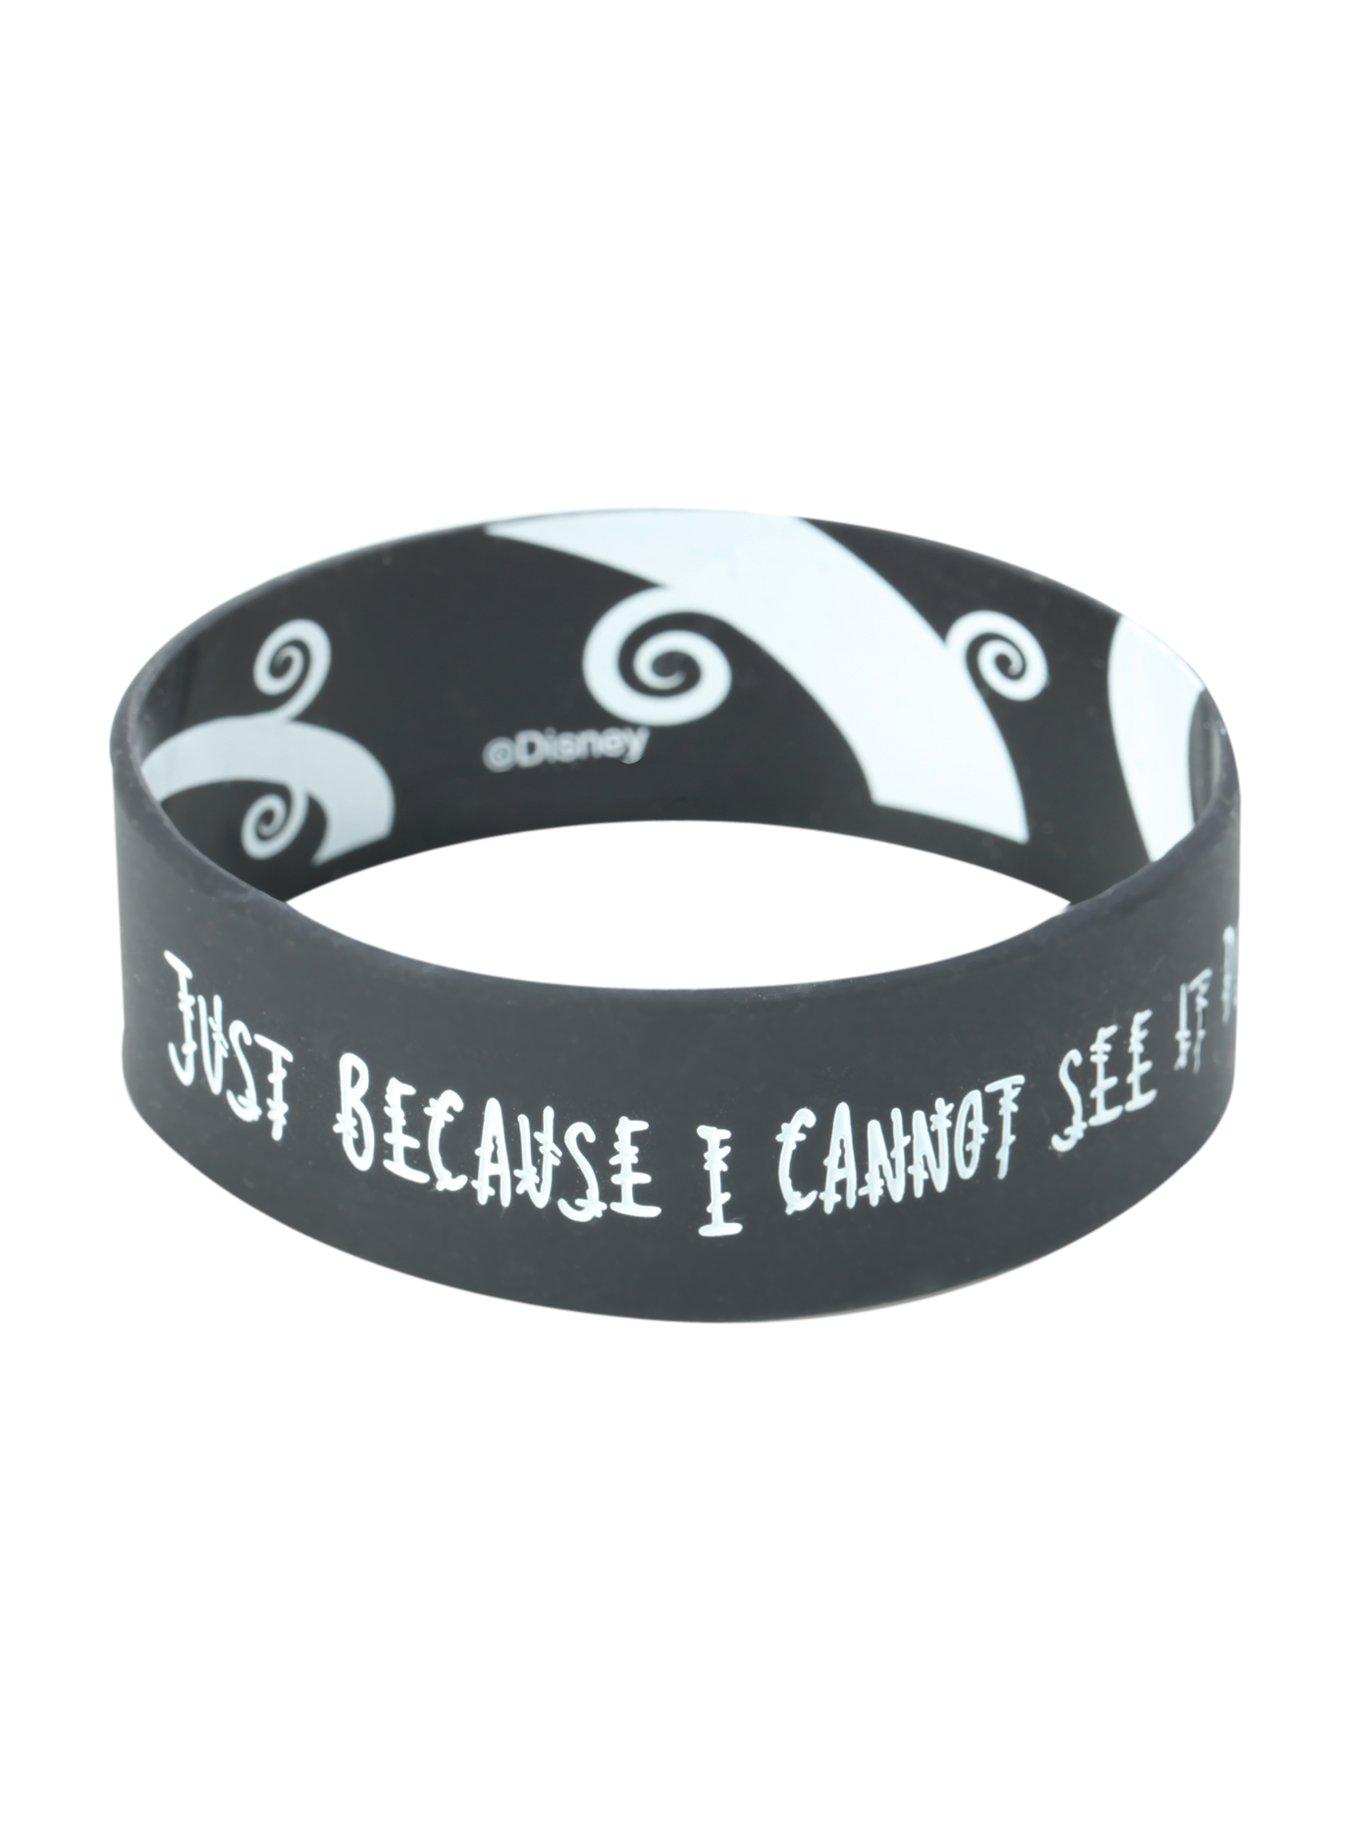 The Nightmare Before Christmas Just Because I Can't See Rubber Bracelet, , hi-res